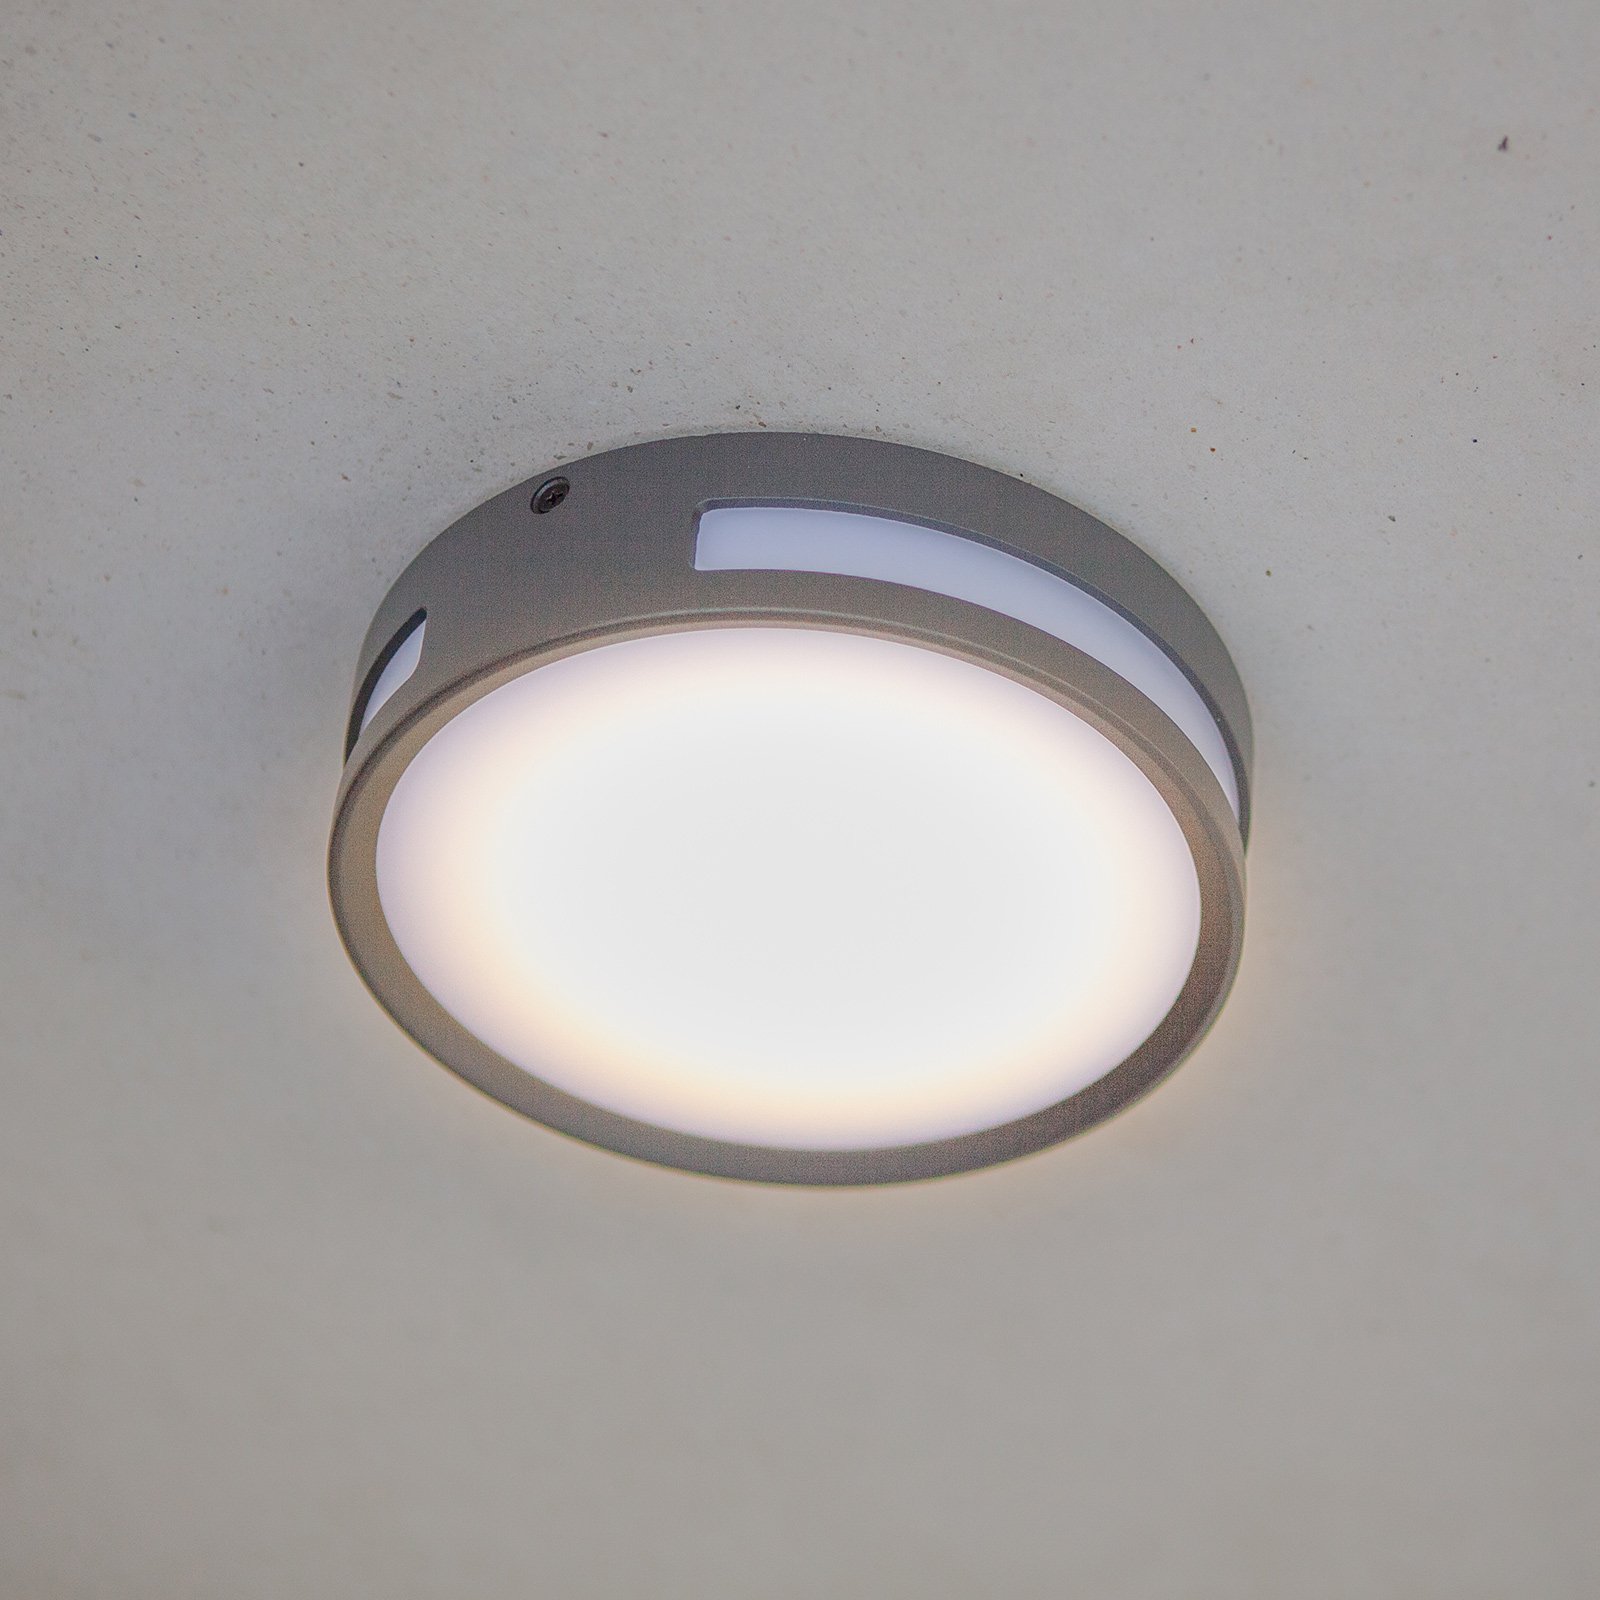 Rota LED ceiling light for outdoors, round